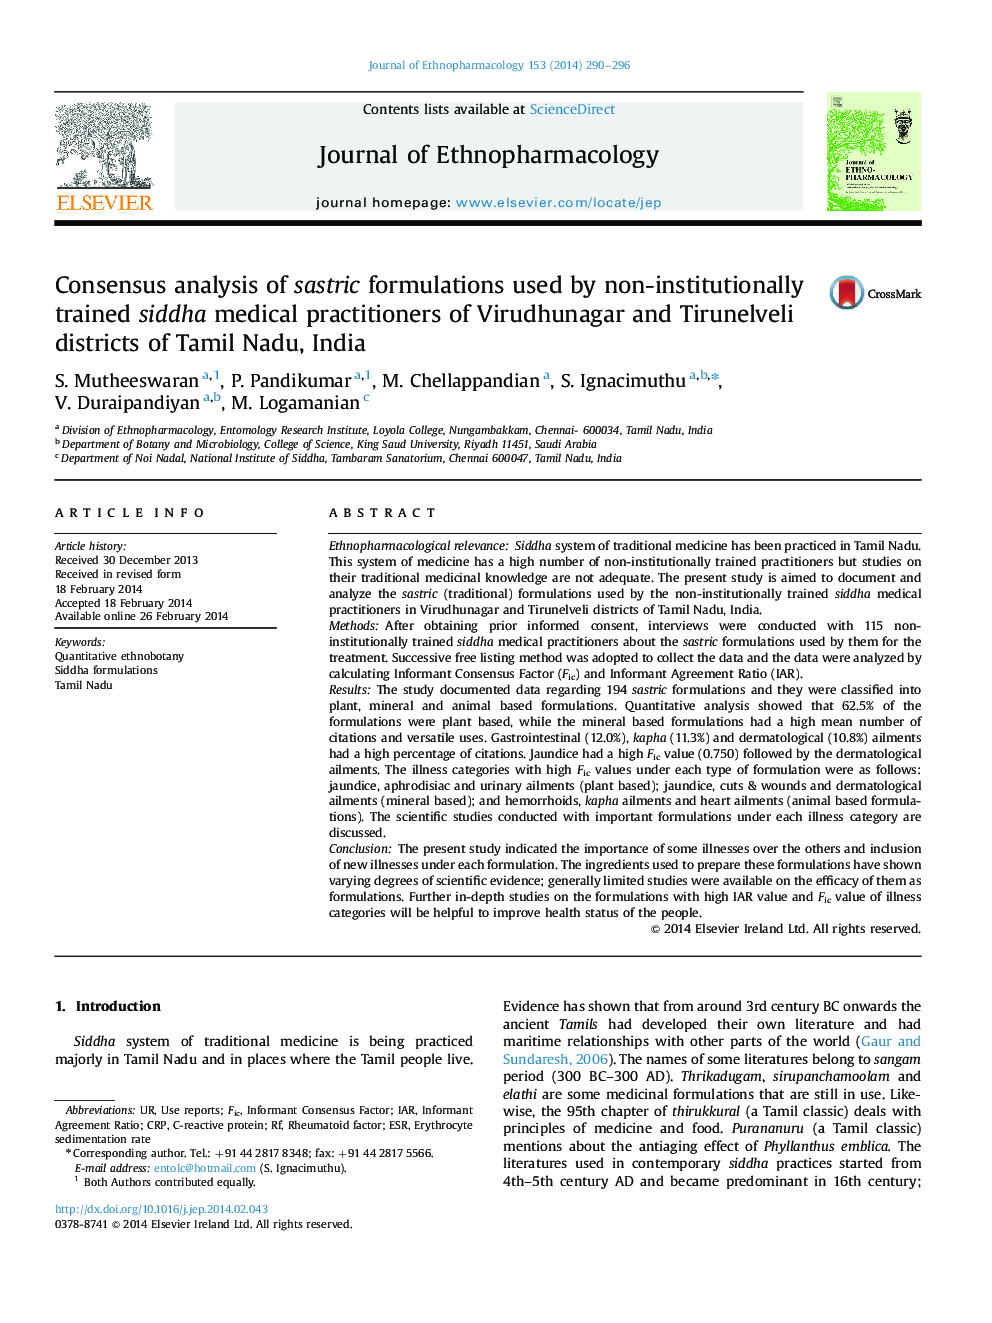 Consensus analysis of sastric formulations used by non-institutionally trained siddha medical practitioners of Virudhunagar and Tirunelveli districts of Tamil Nadu, India